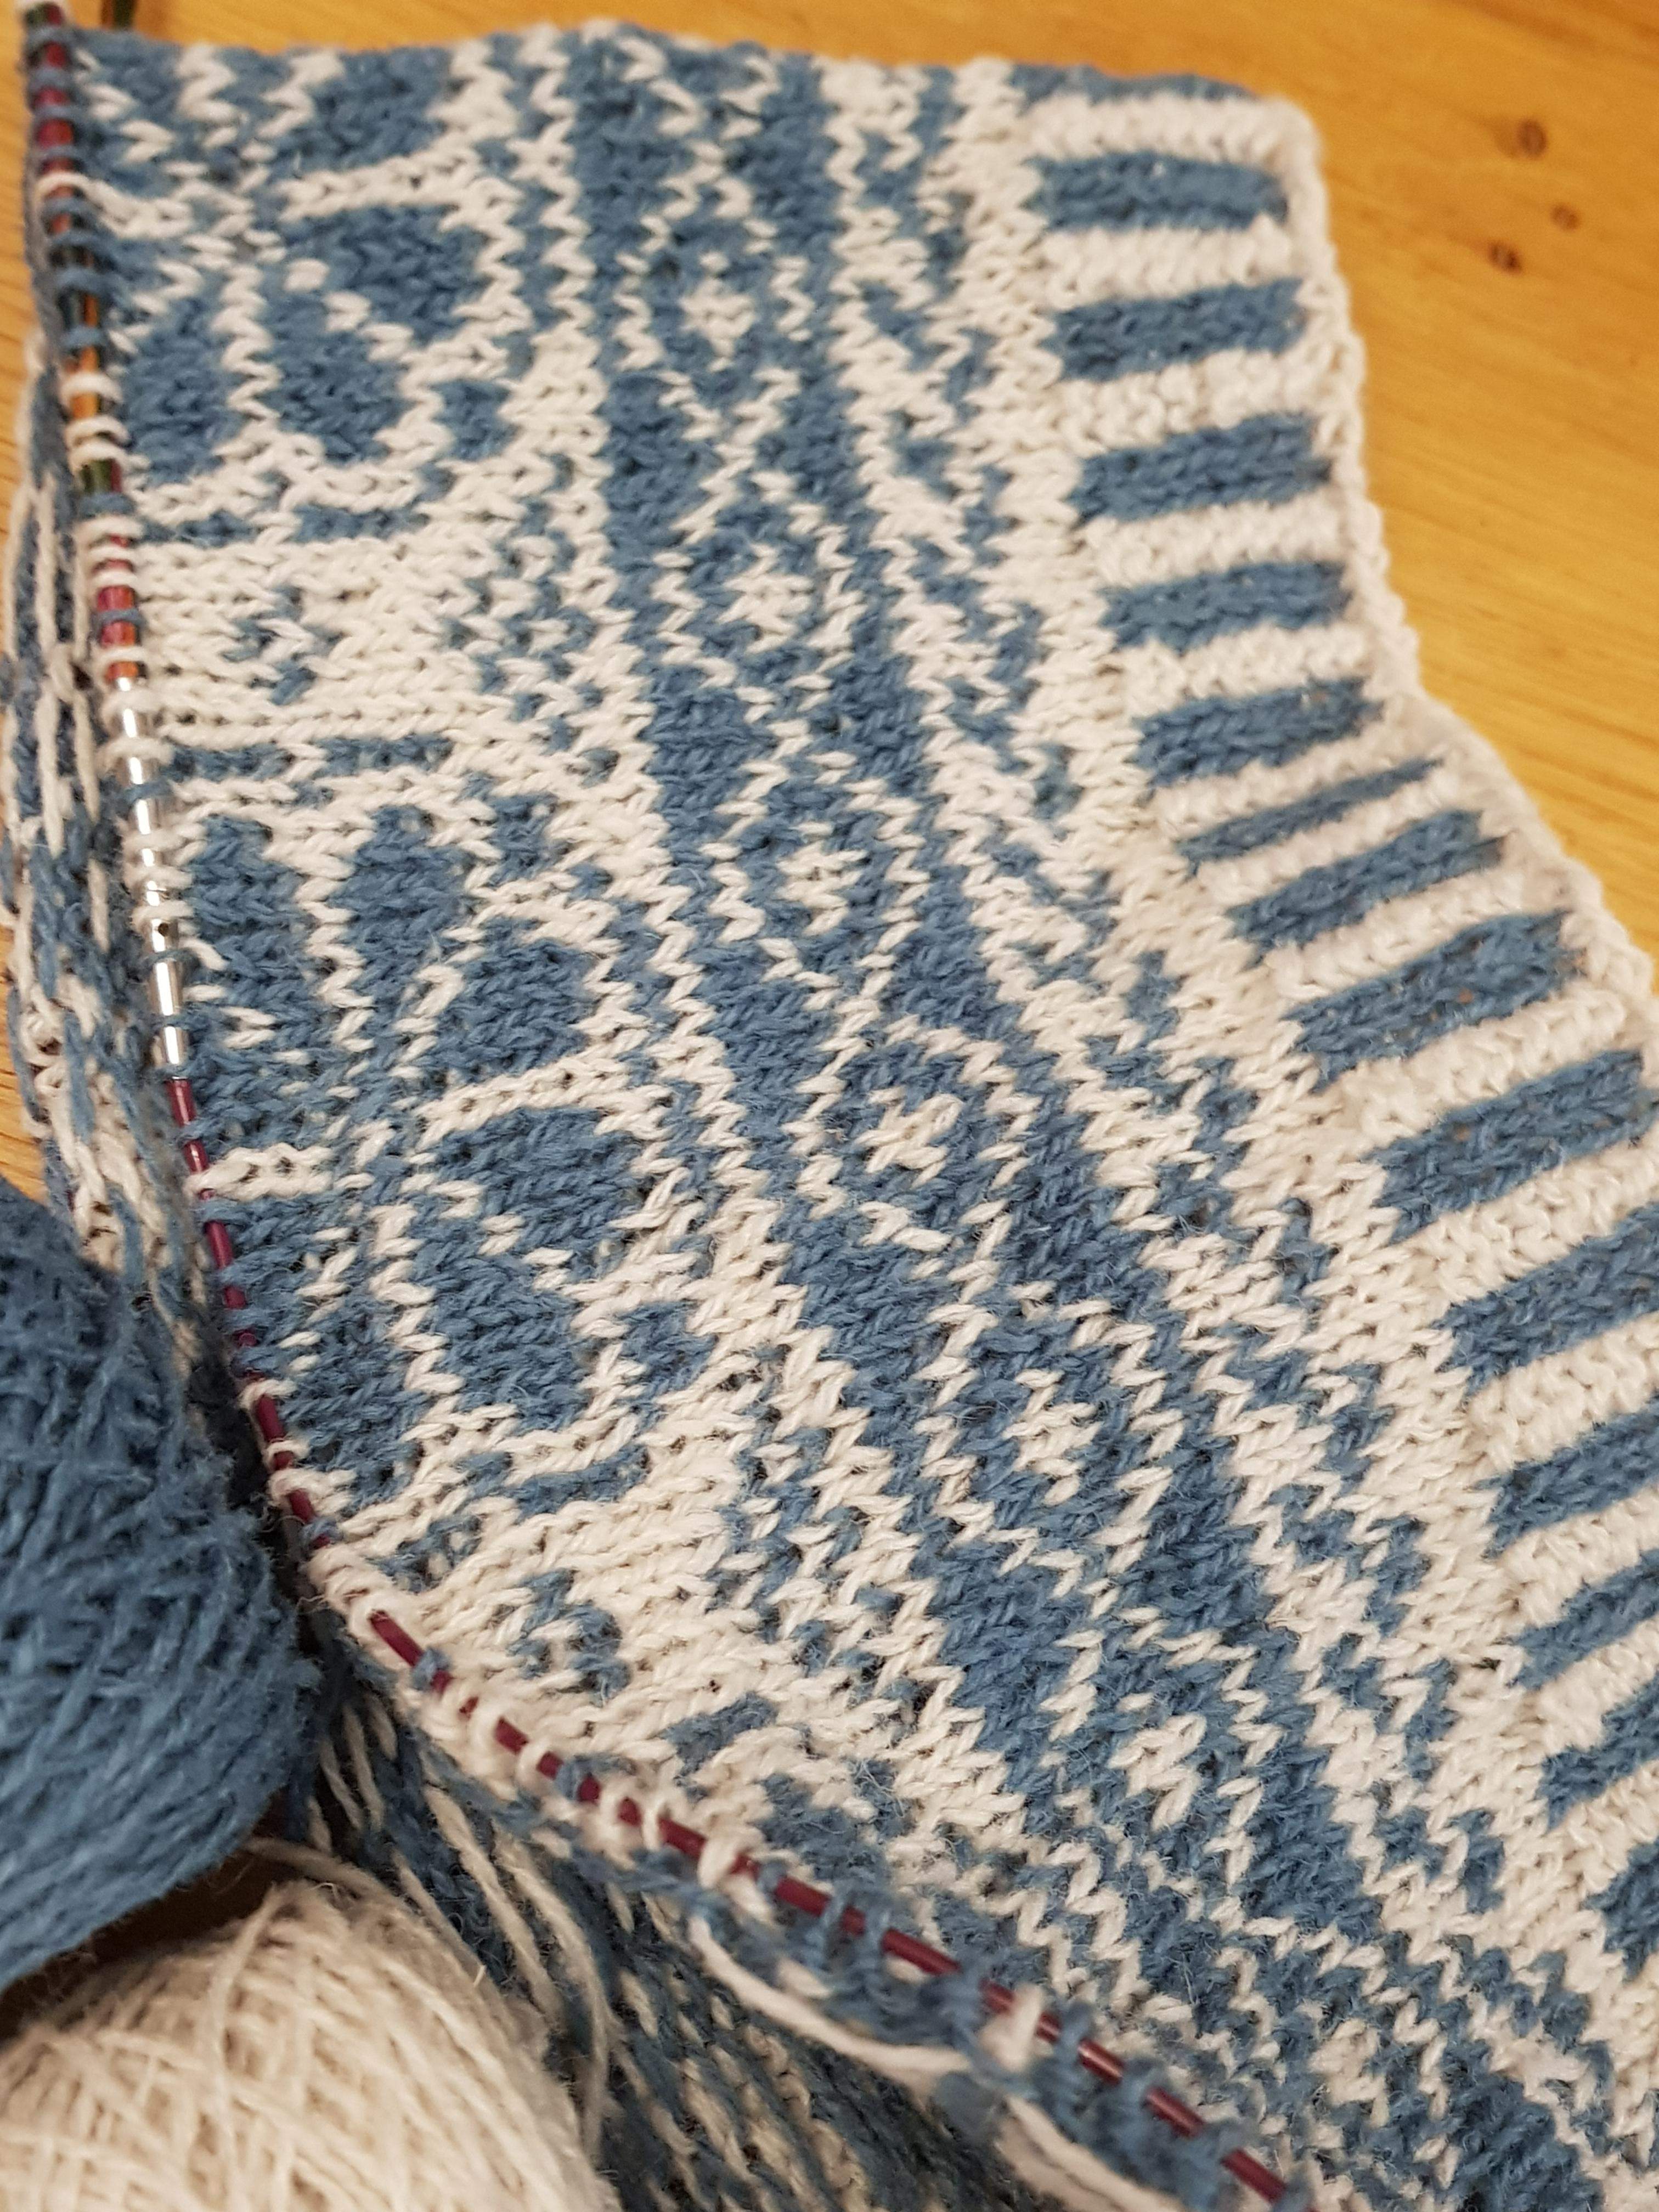 Second May knitting retreat - final day